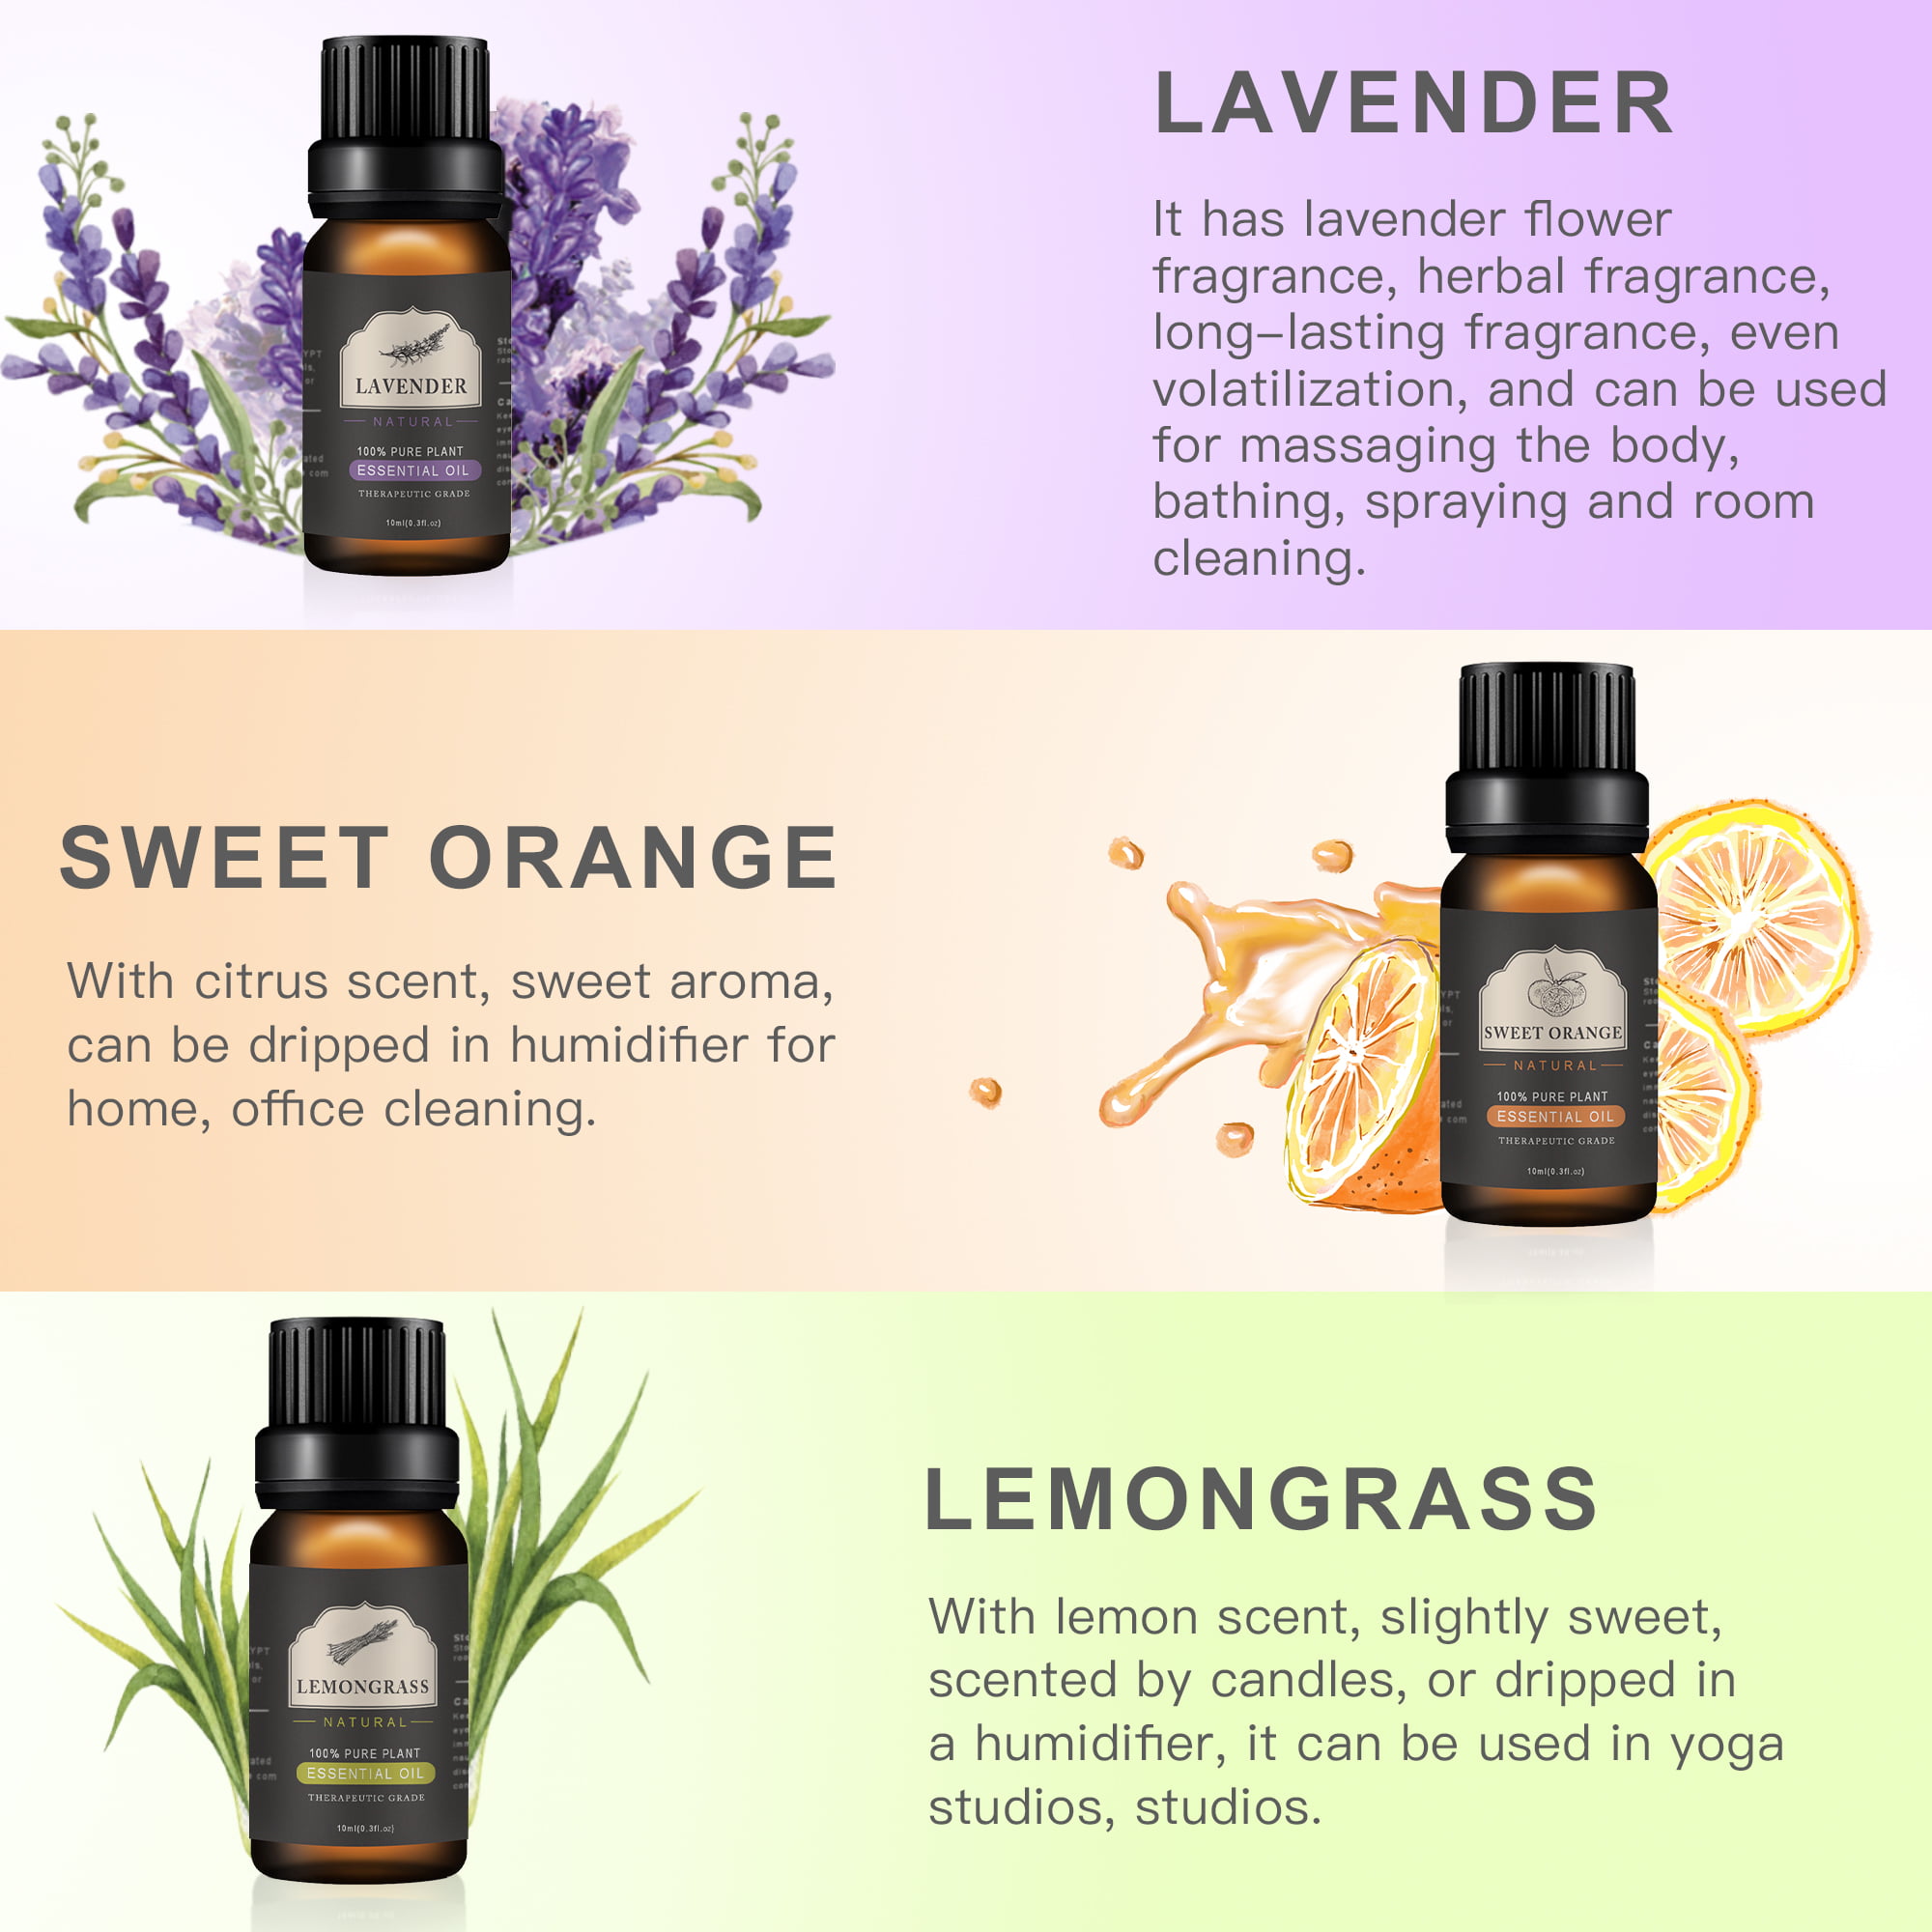 6 Uses For Lemongrass Essential Oil - Young Living Essential Oils, Beauty &  Health Products